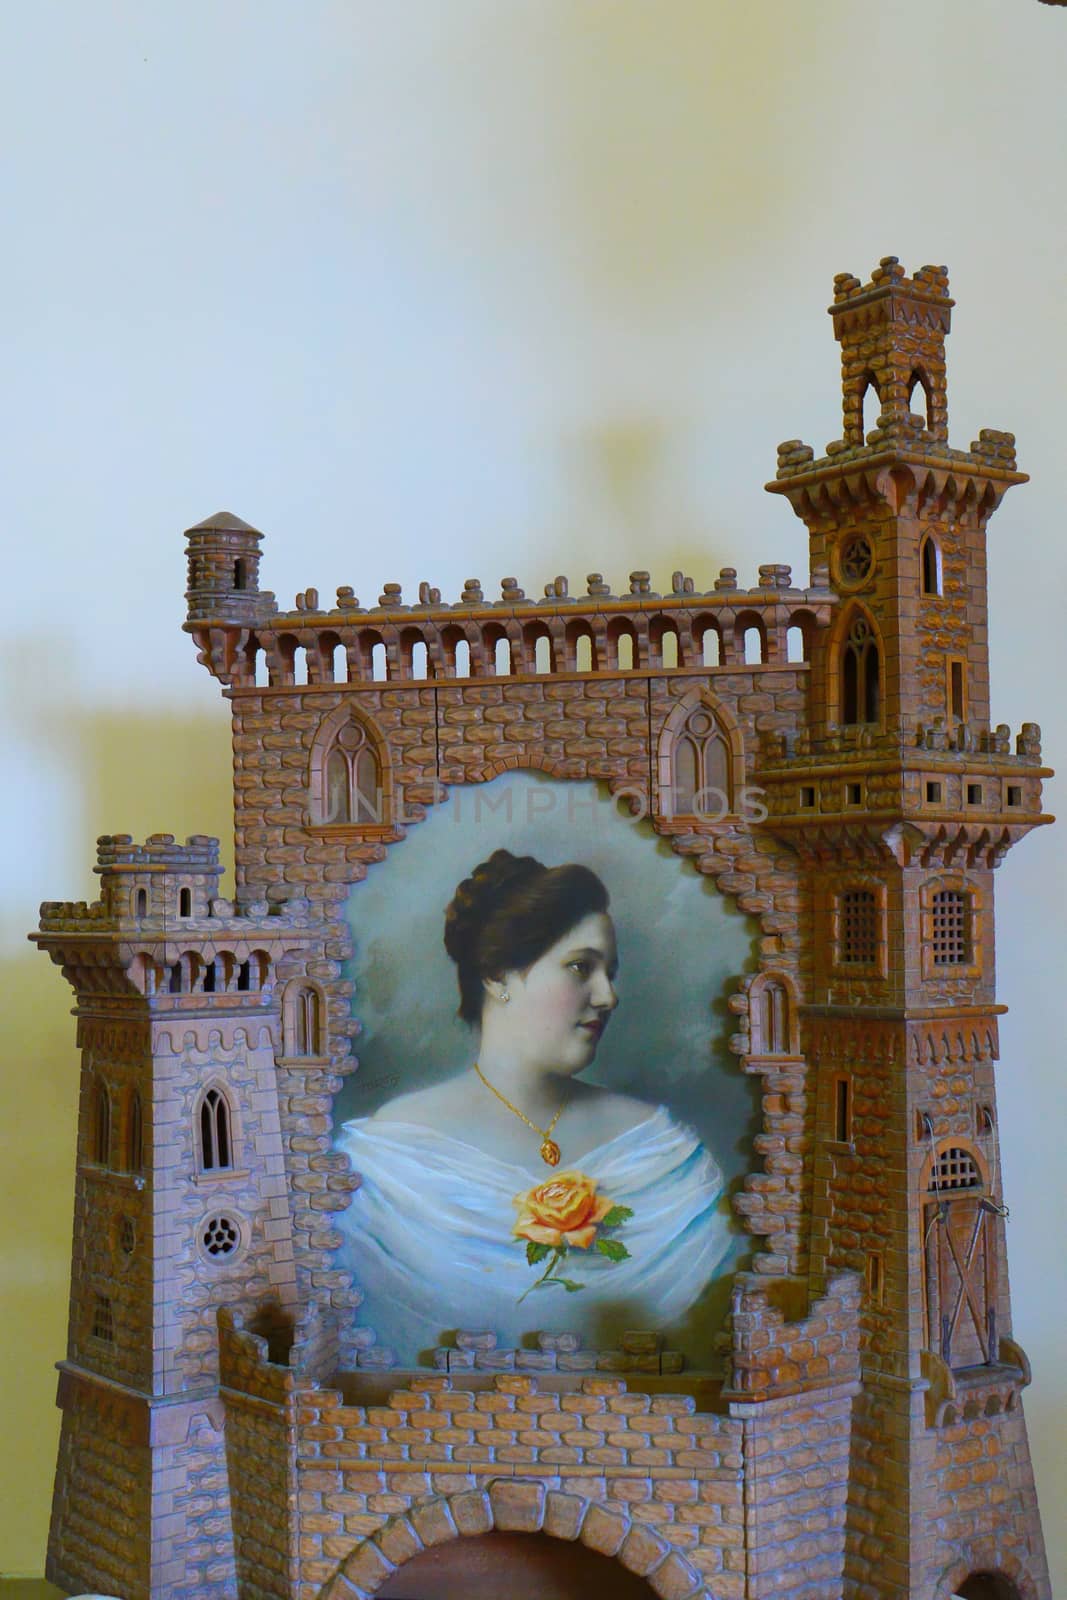 composition in the museum in the form of a wall with towers with a portrait of a woman in the middle